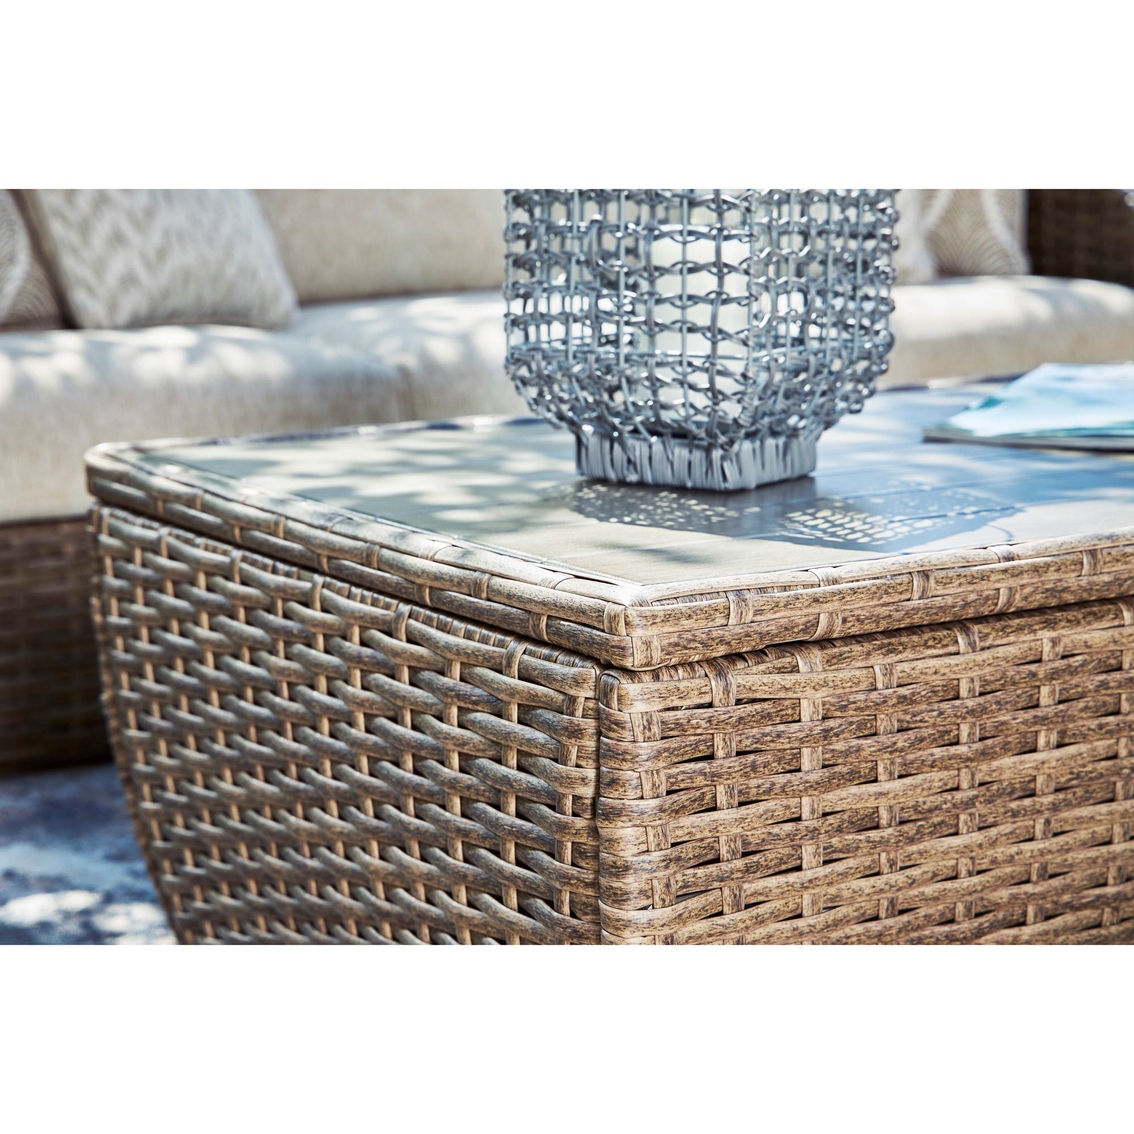 Signature Design by Ashley Sandy Bloom Outdoor Coffee Table - Image 6 of 7